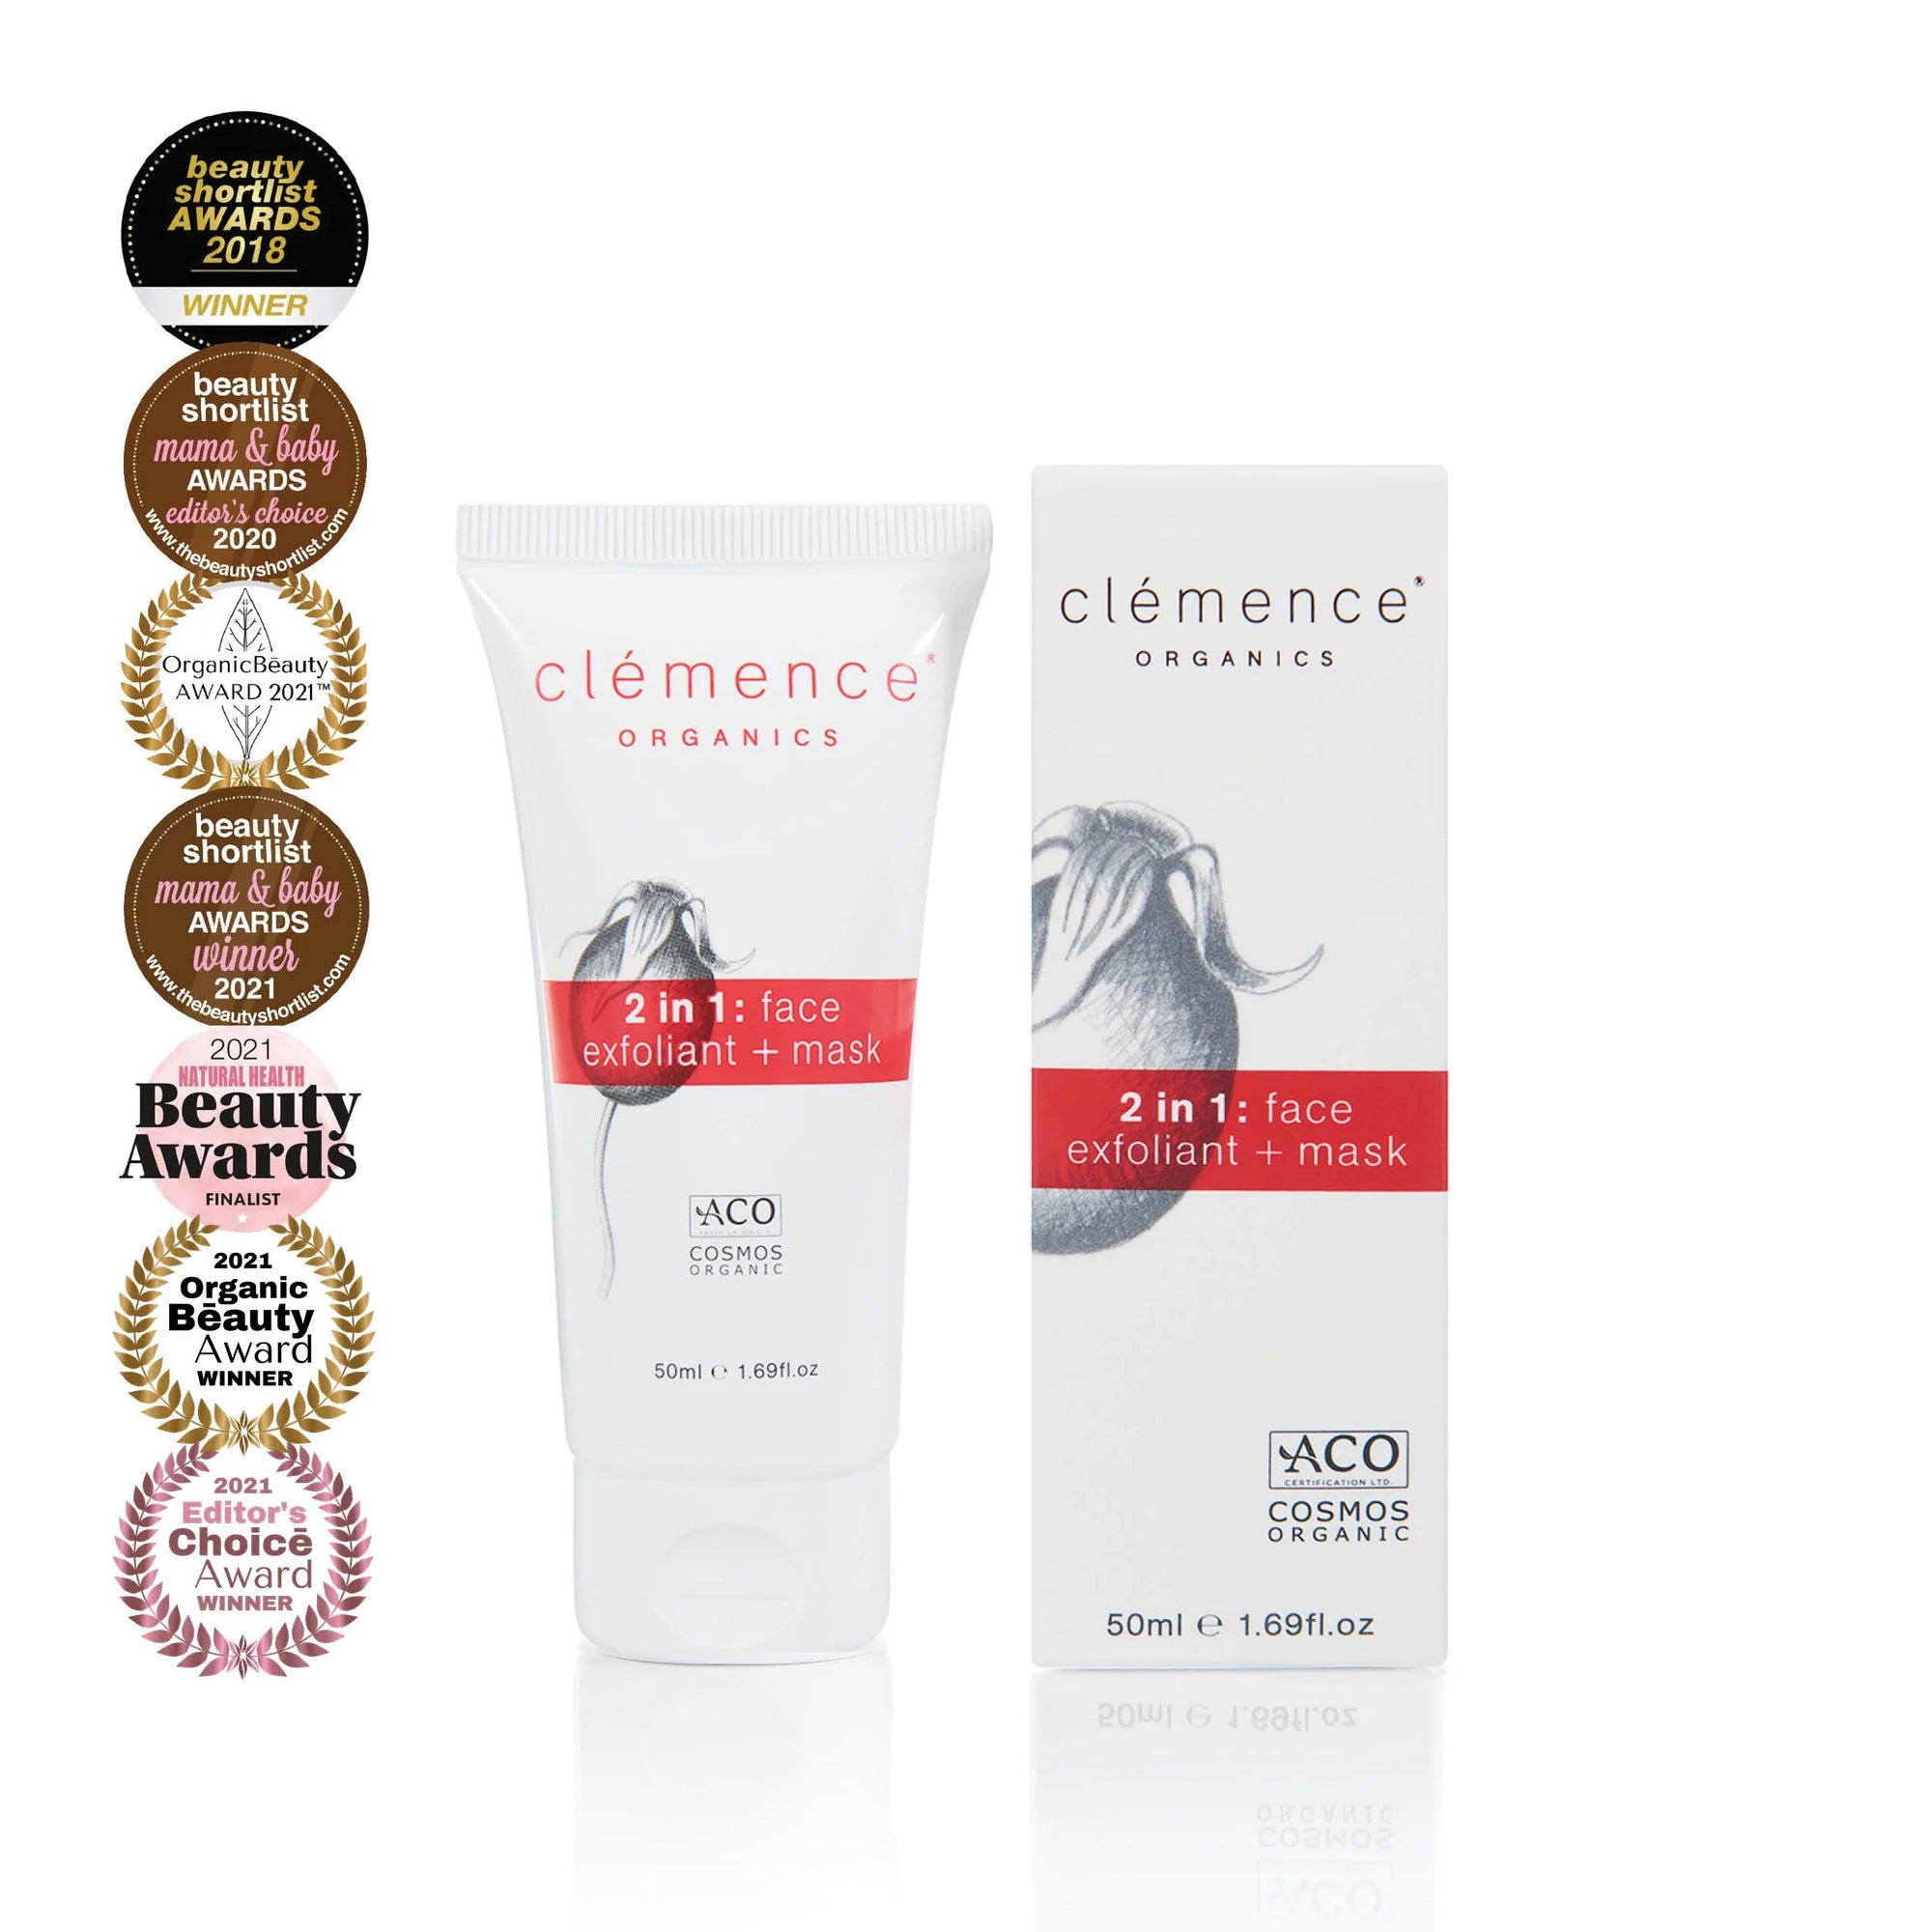 Clemence Organics 2 in 1 Face Exfoliant + Mask